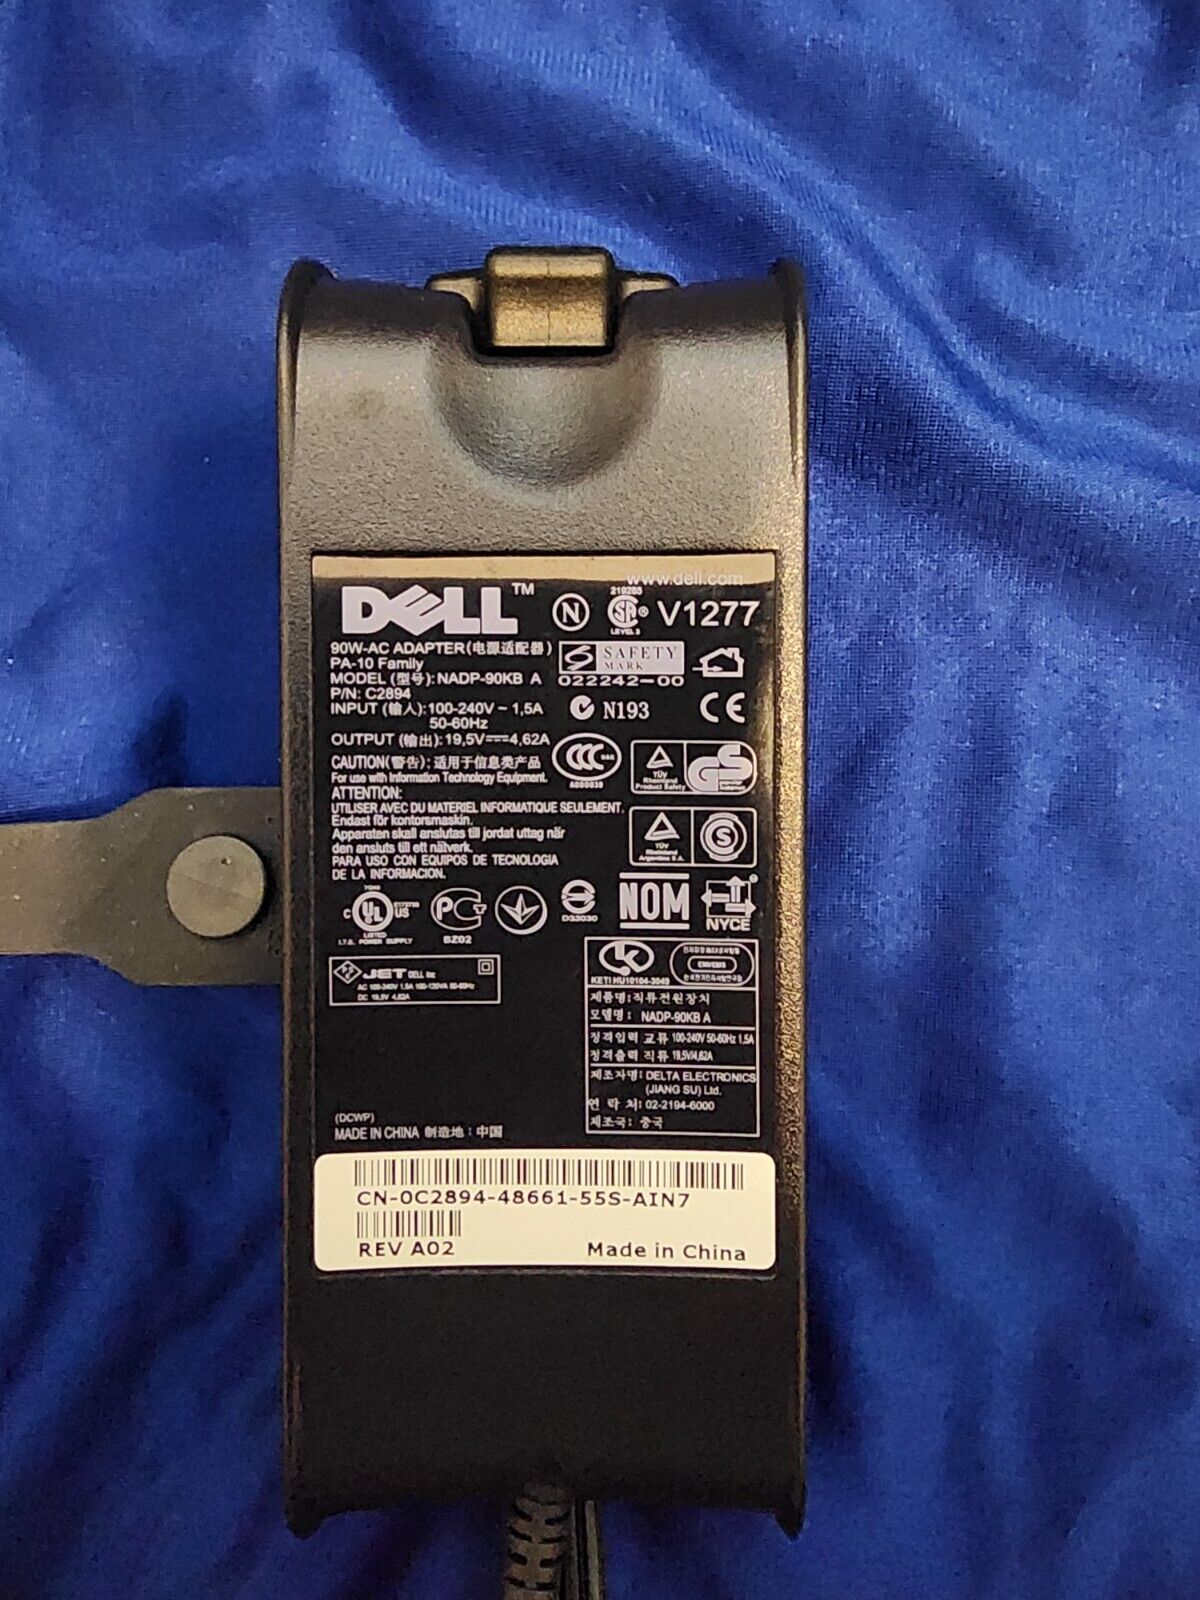 Lot of 4 Genuine OEM Dell laptop chargers - tested